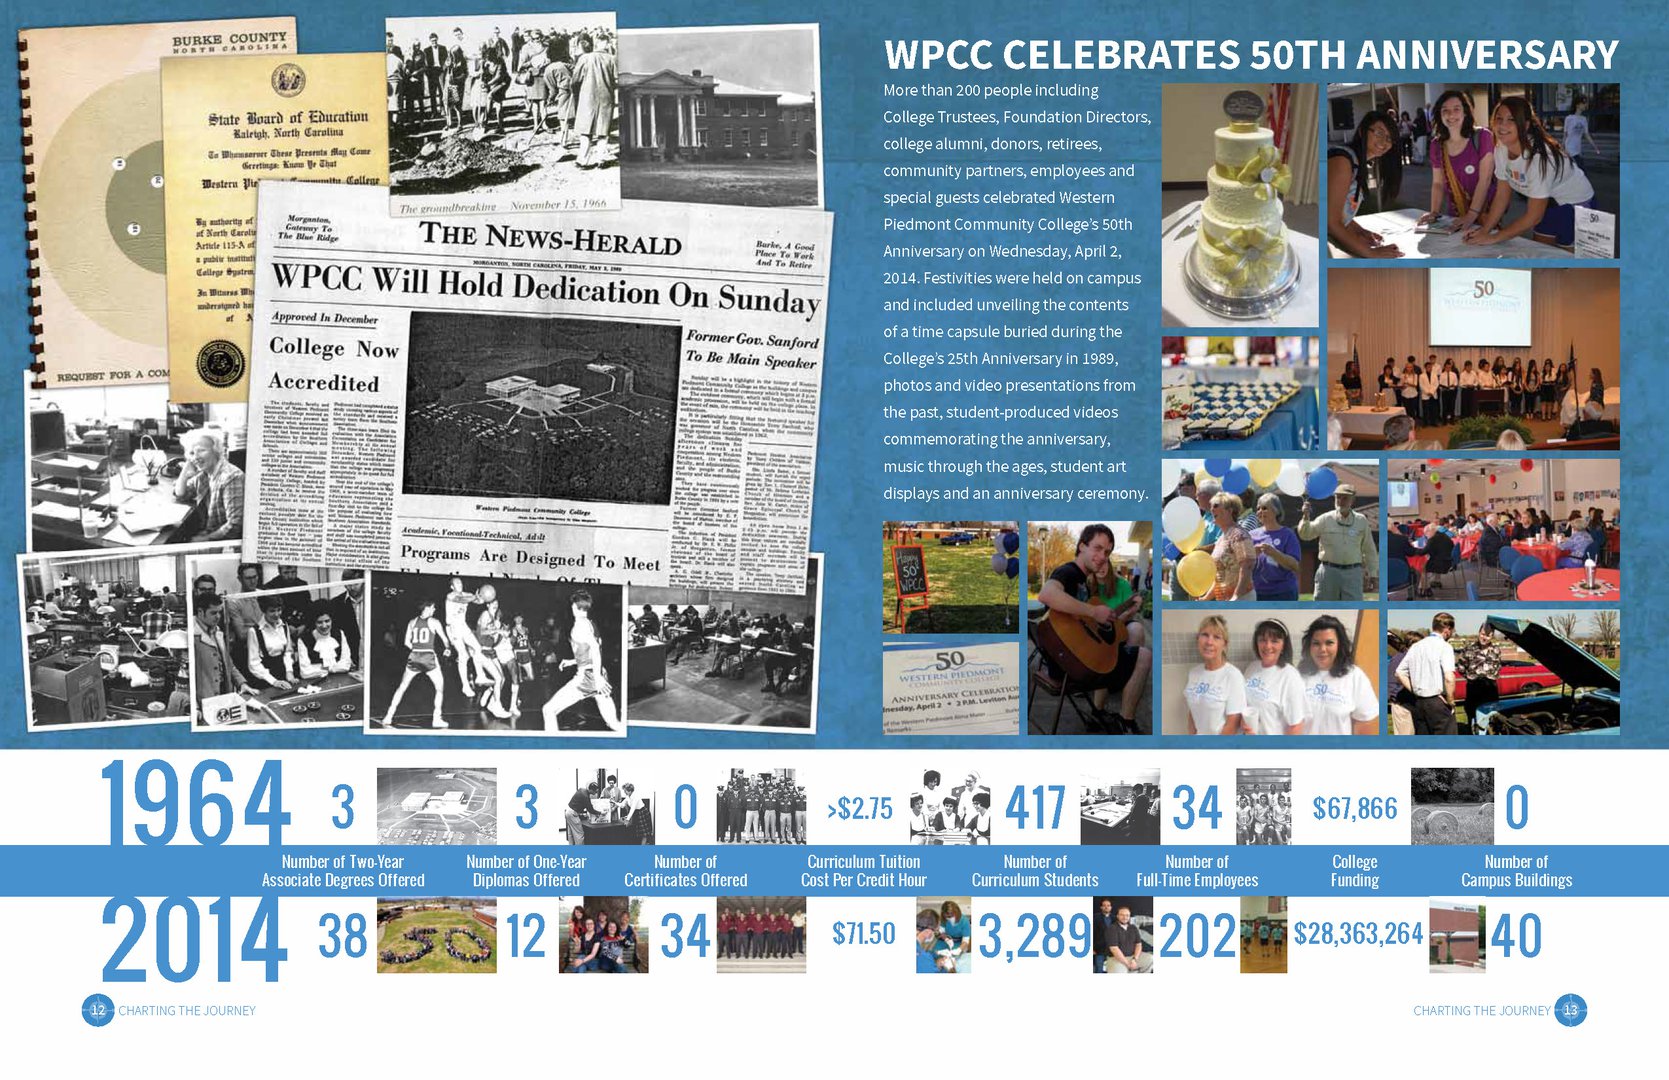 WPCC annual report